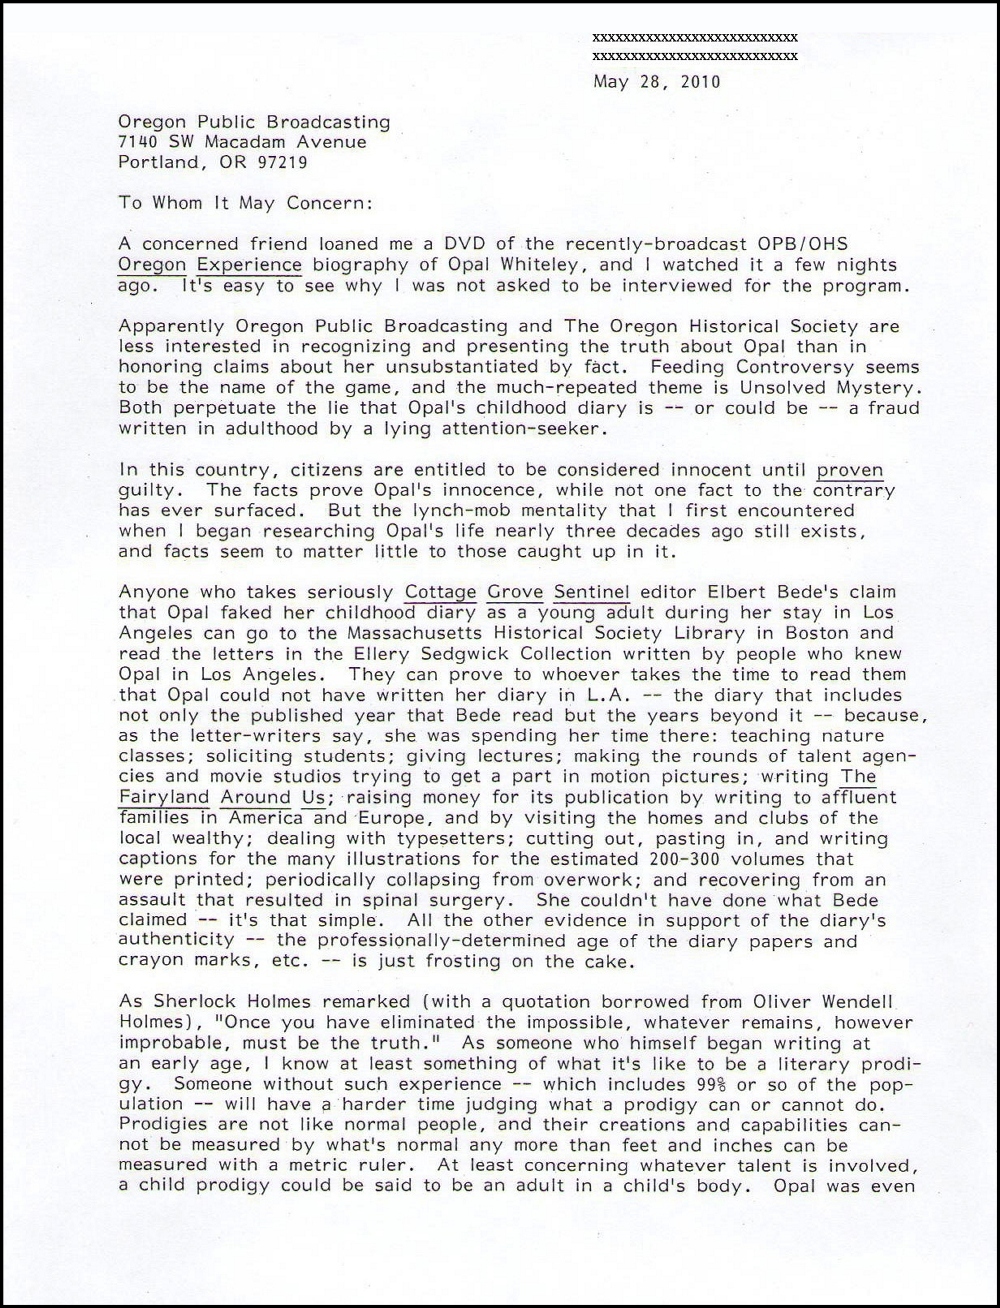 Letter from Benjamin Hoff to OPB May 2010